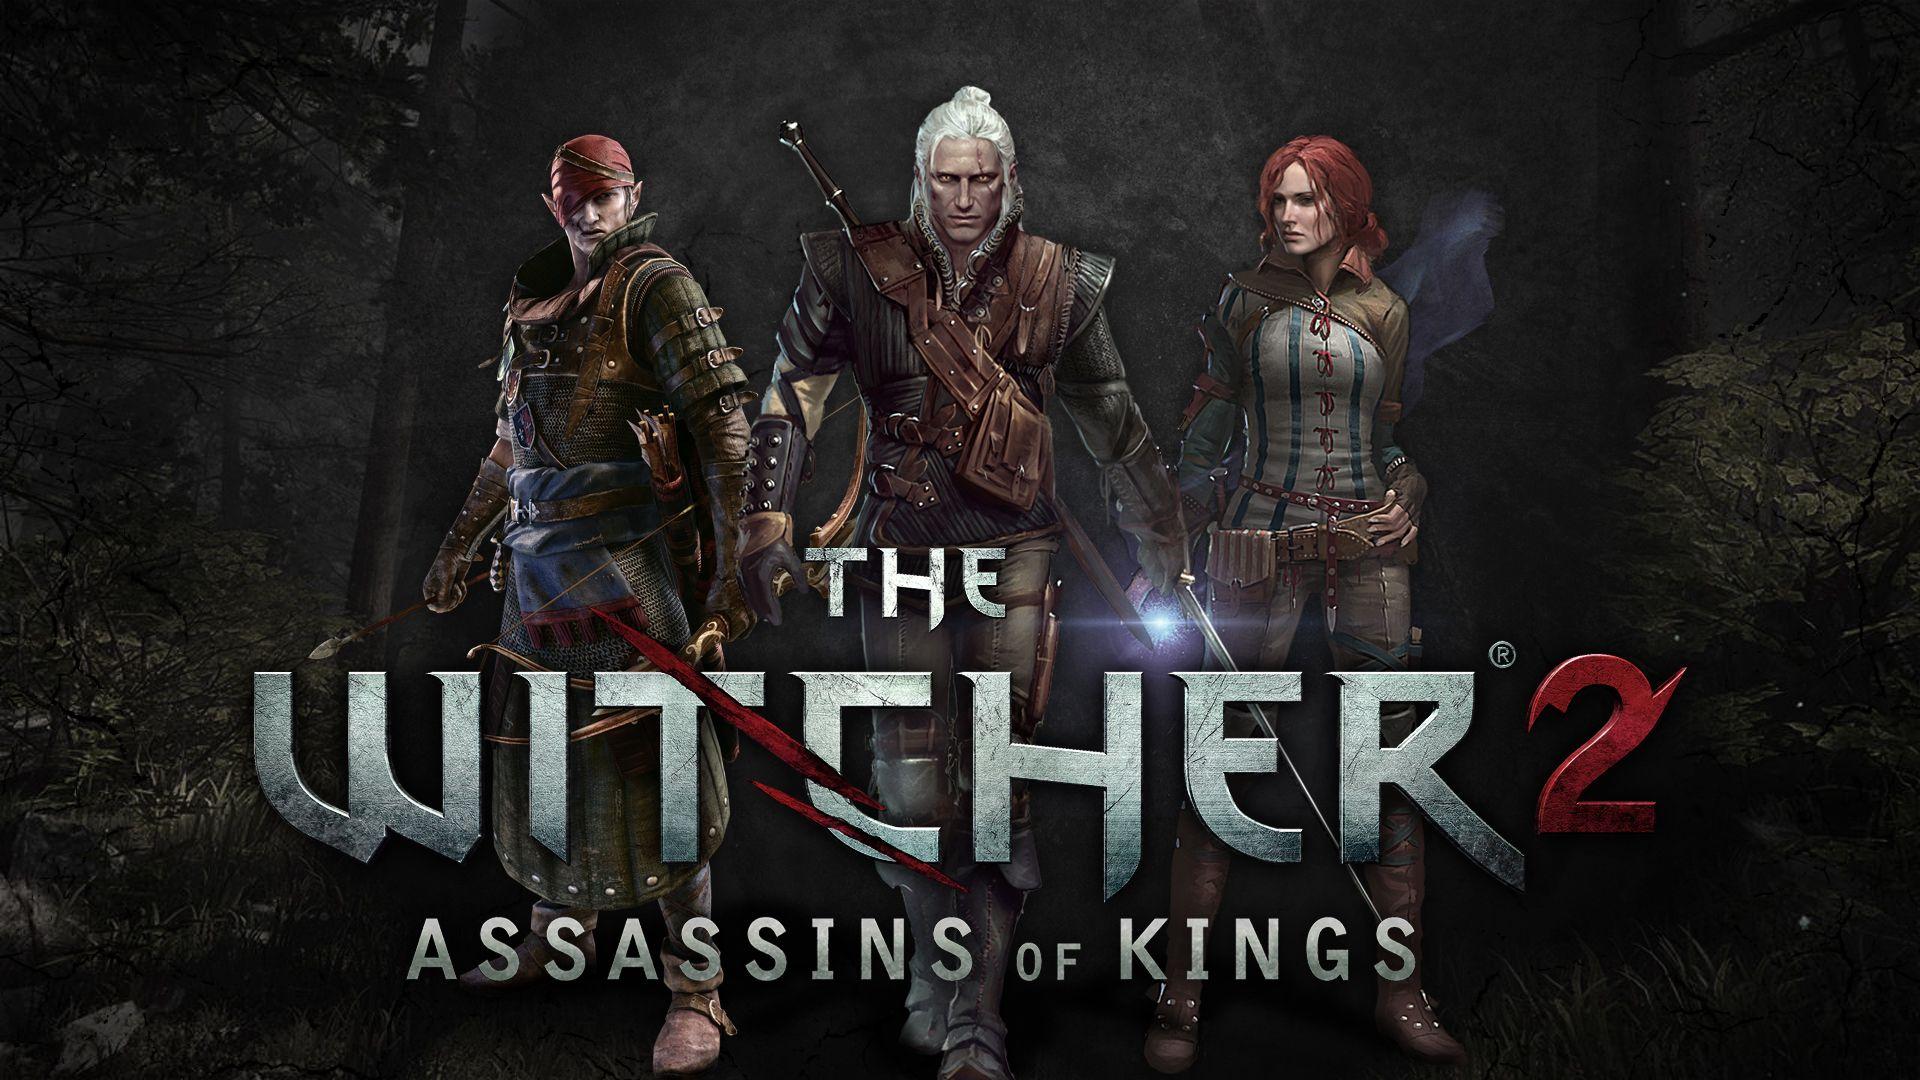 The Witcher 2 Assassins Of Kings Wallpaper, 43 The Witcher 2